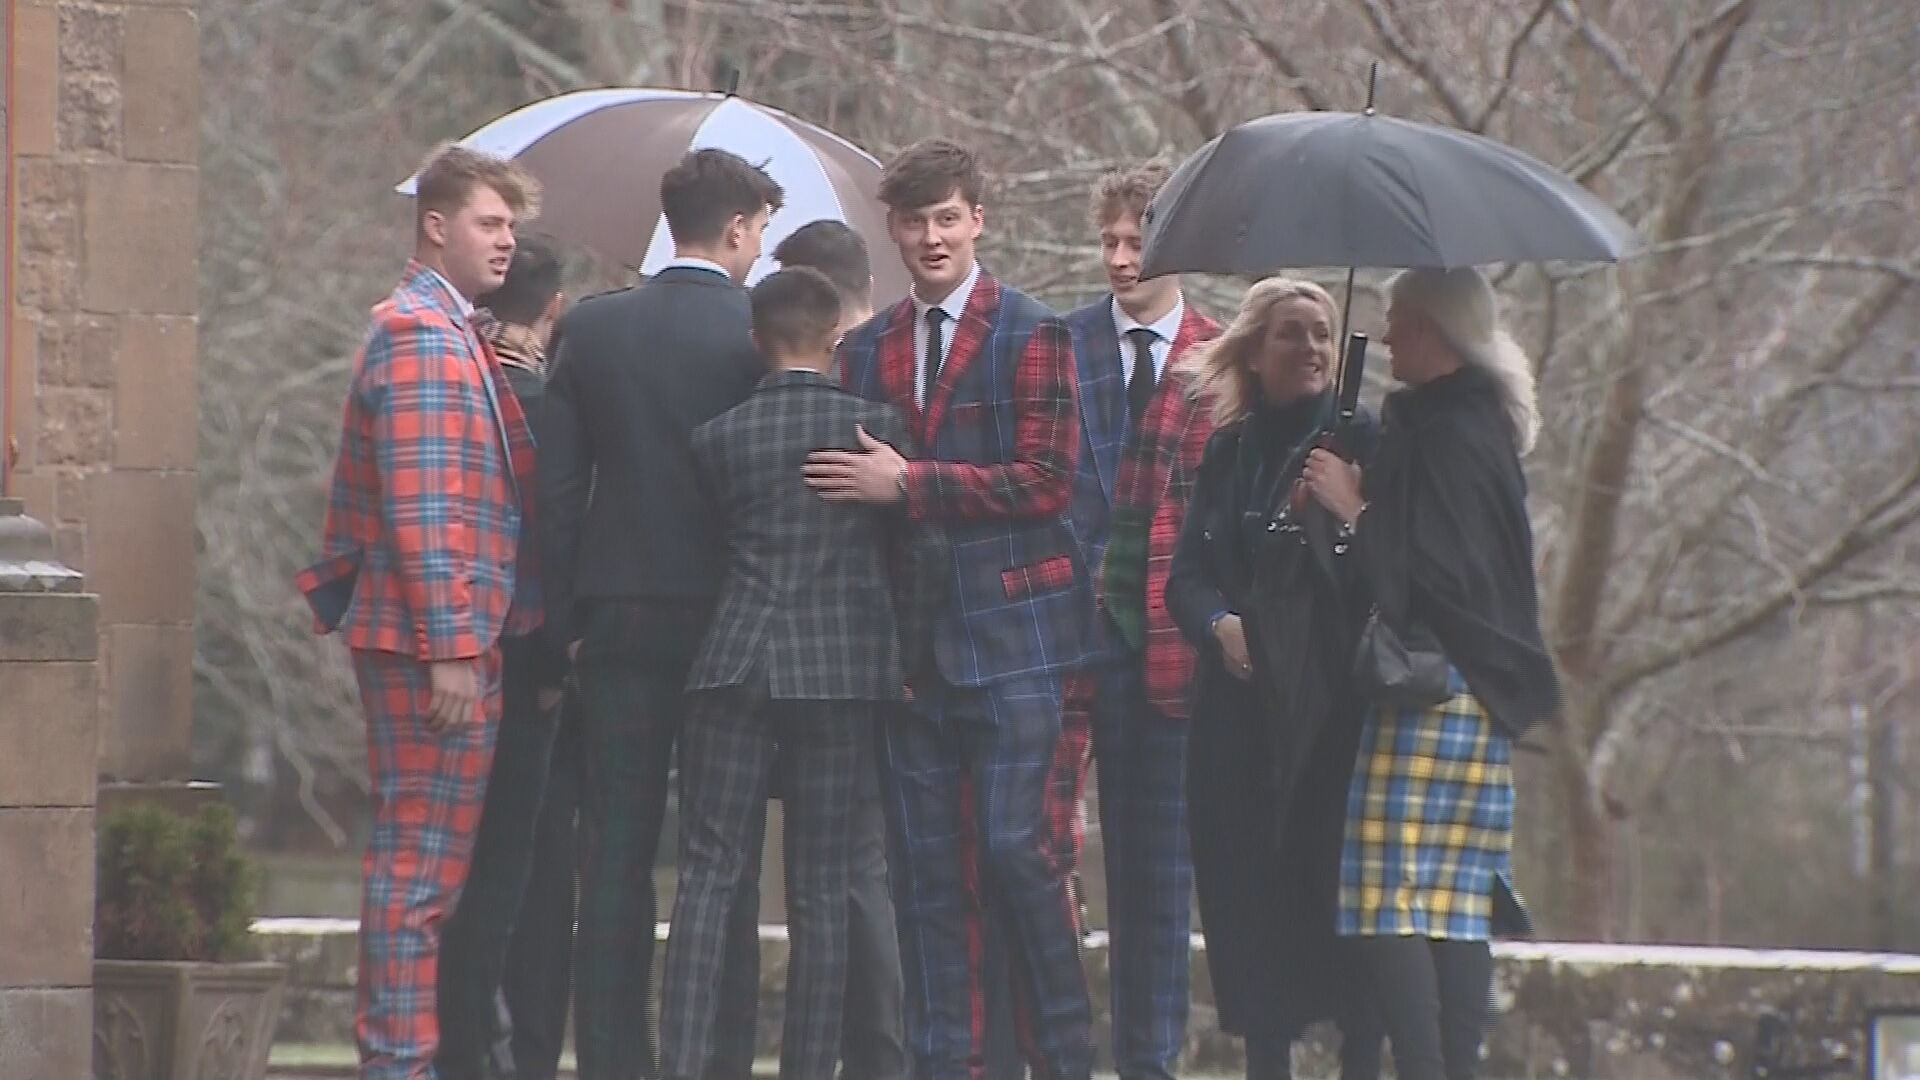 Friends and family arrived clad in tartan suits to pay tribute to the former rugby star.